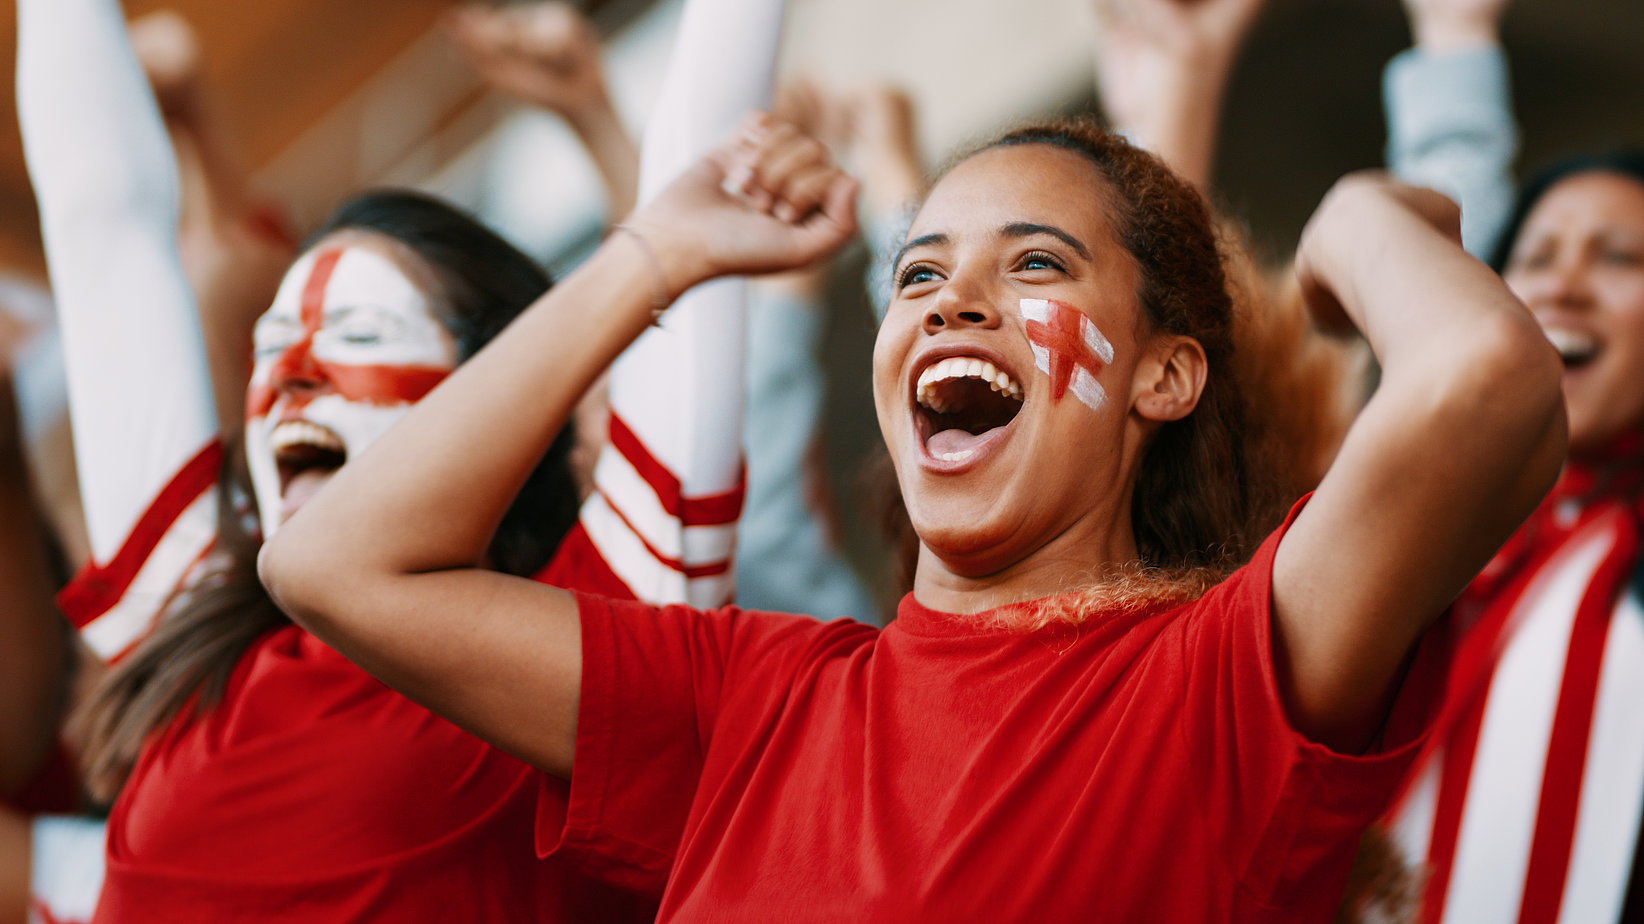 A woman has painted the England flag on your face and is wearing a red T-shirt. She is cheering and happy. 